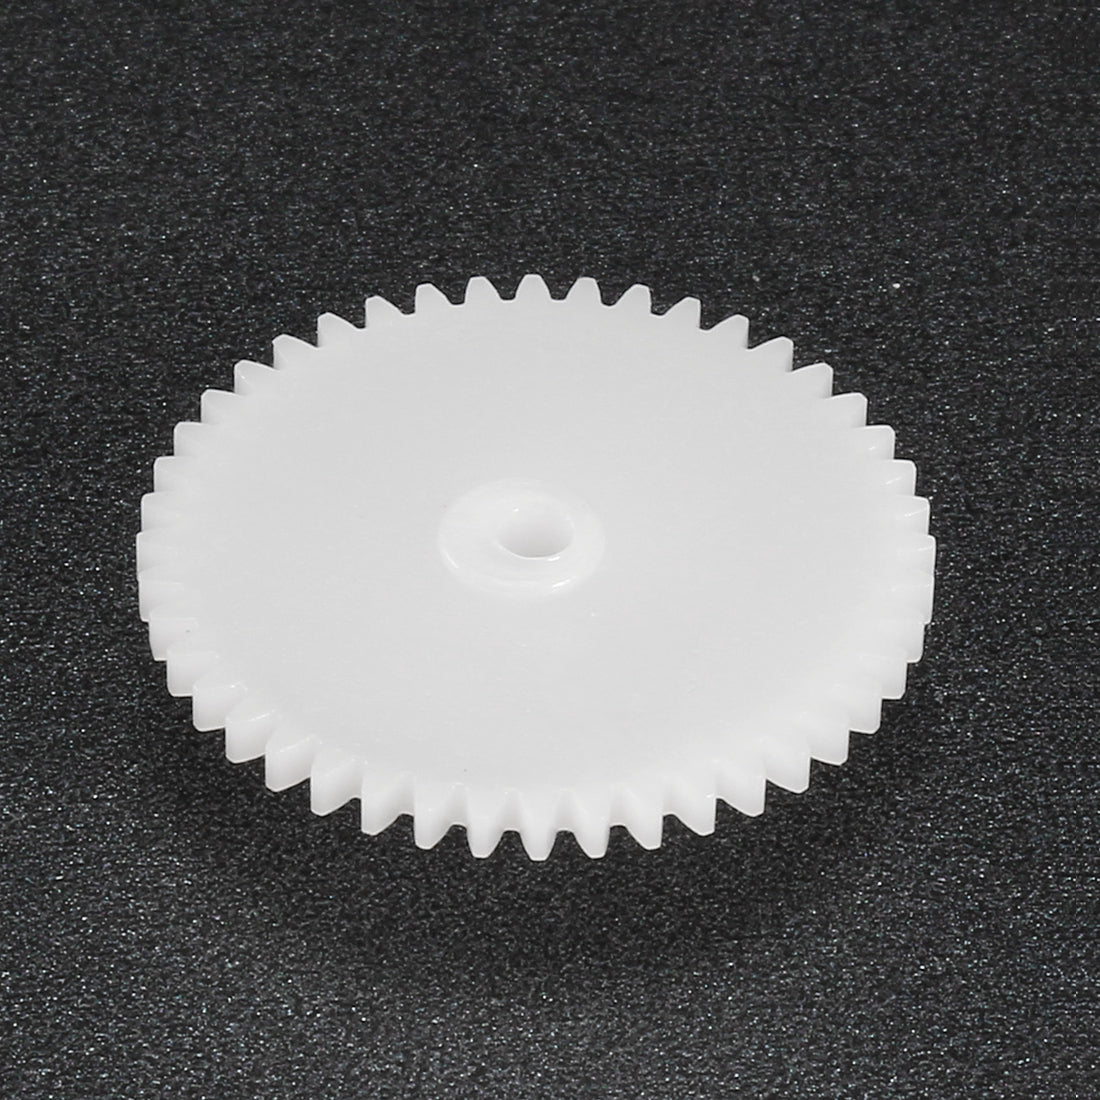 uxcell Uxcell 10Pcs 44102B Plastic Gear Accessories with 44 Teeth for DIY Car Robot Motor